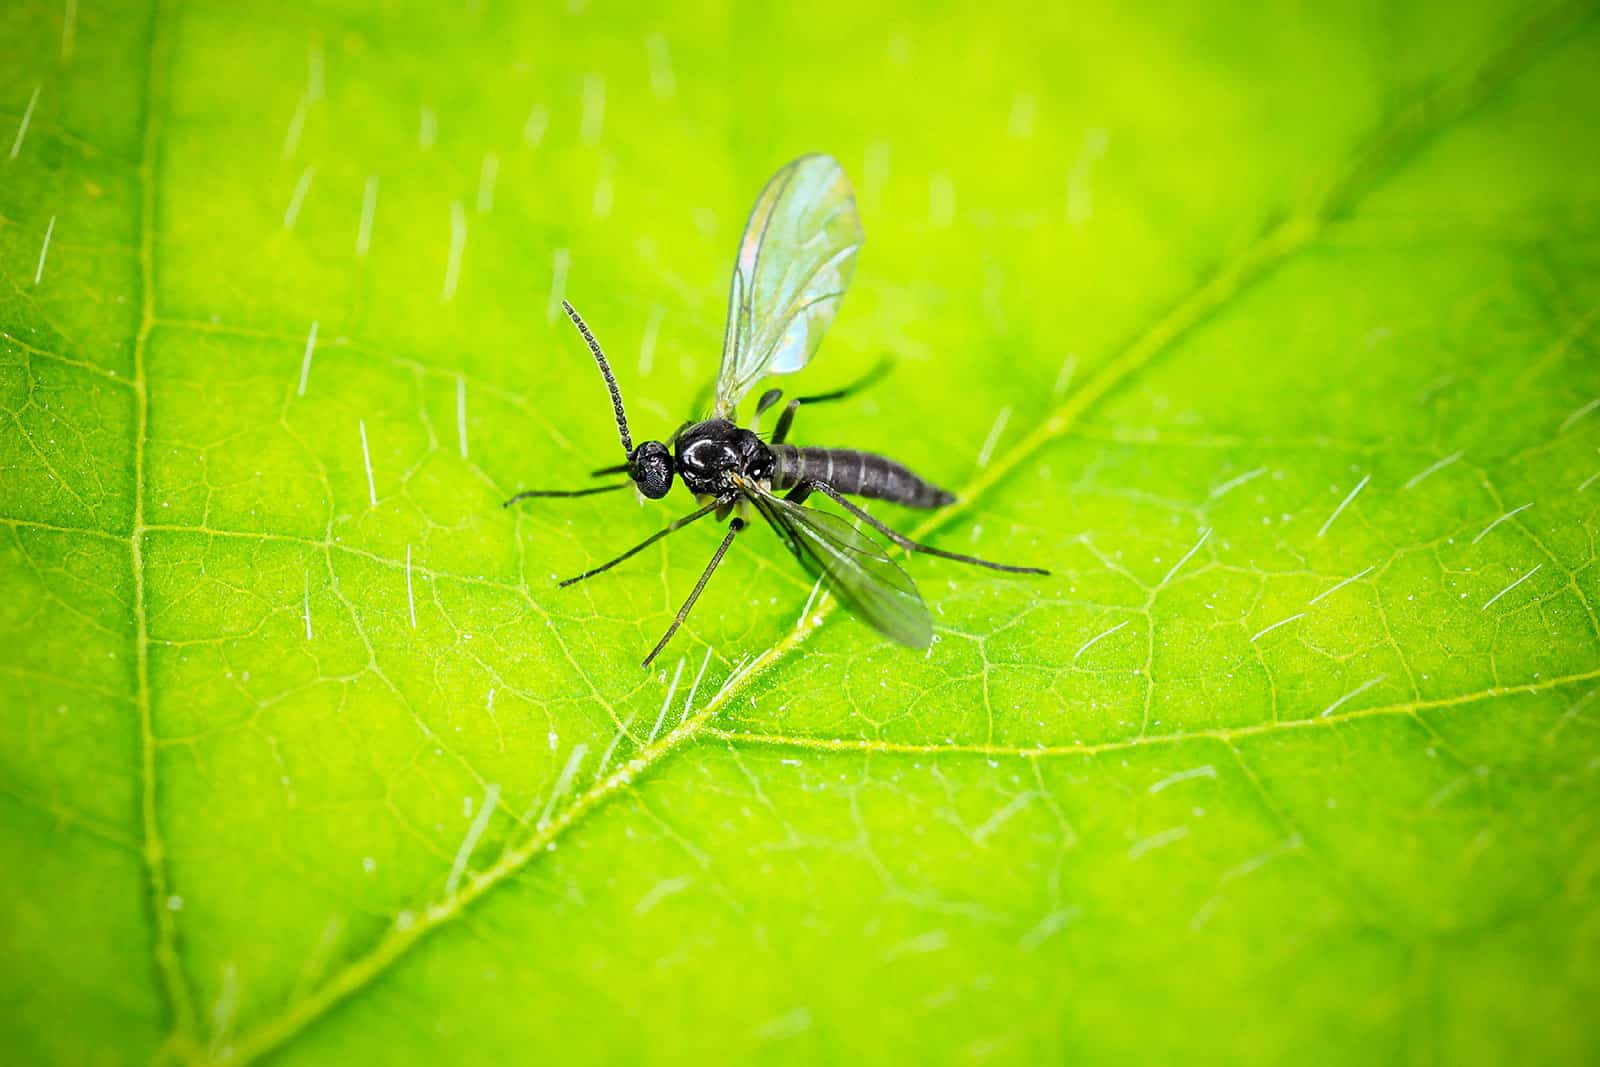 Close-up of a fungus gnat on a green leaf